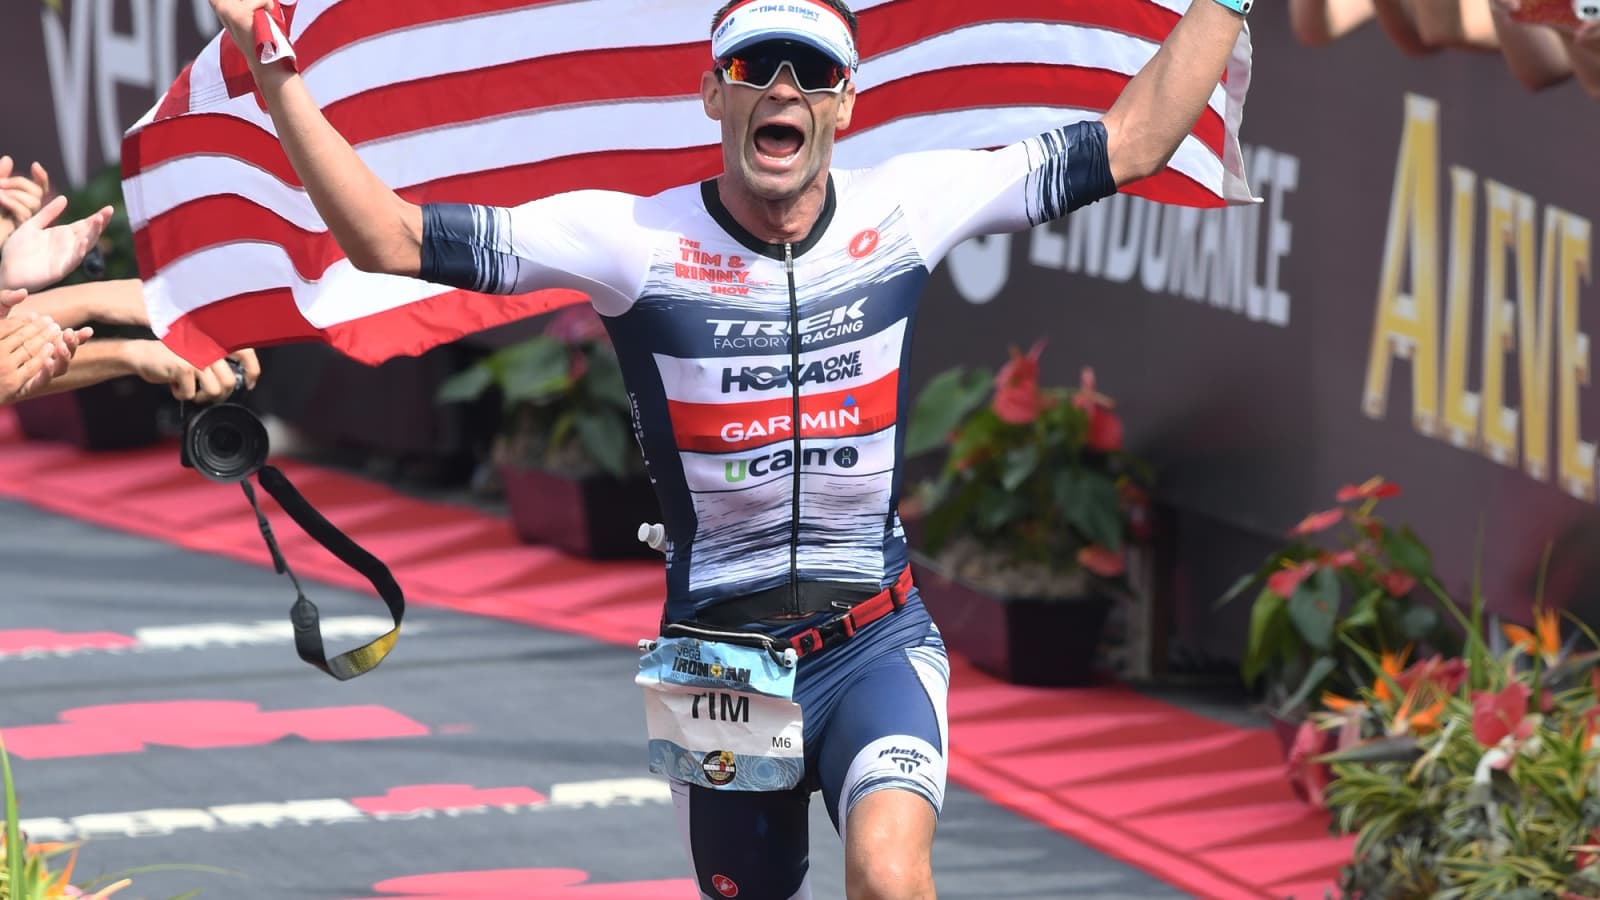 Bliv såret Piping samling Daily routine of America's fastest Ironman, Tim O'Donnell